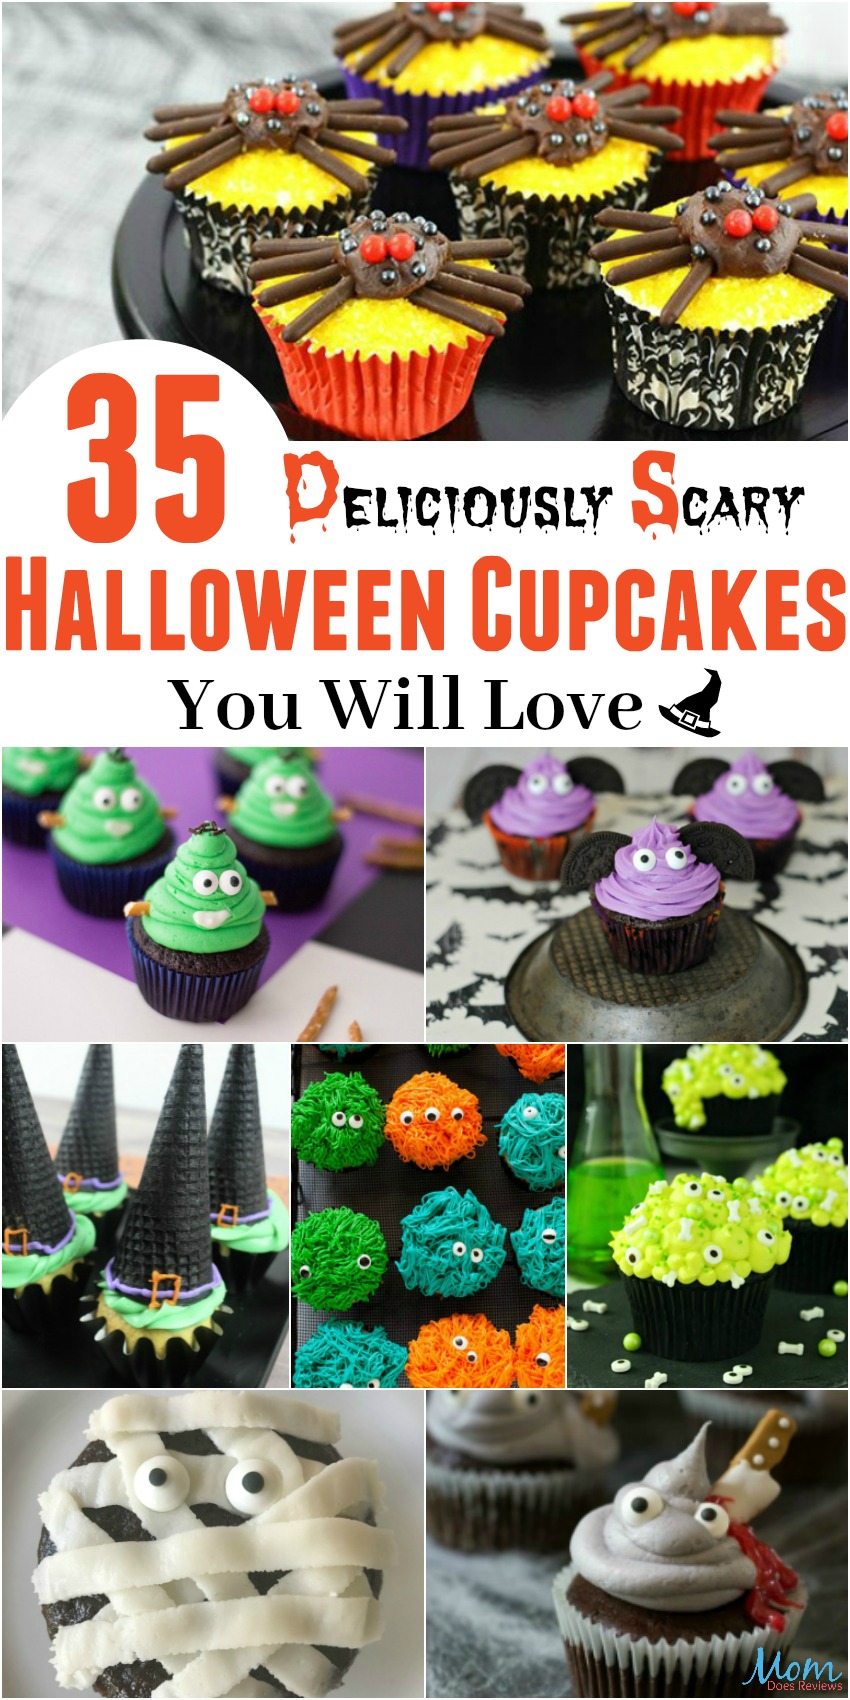 35 Deliciously Scary Halloween Cupcakes You Will Love